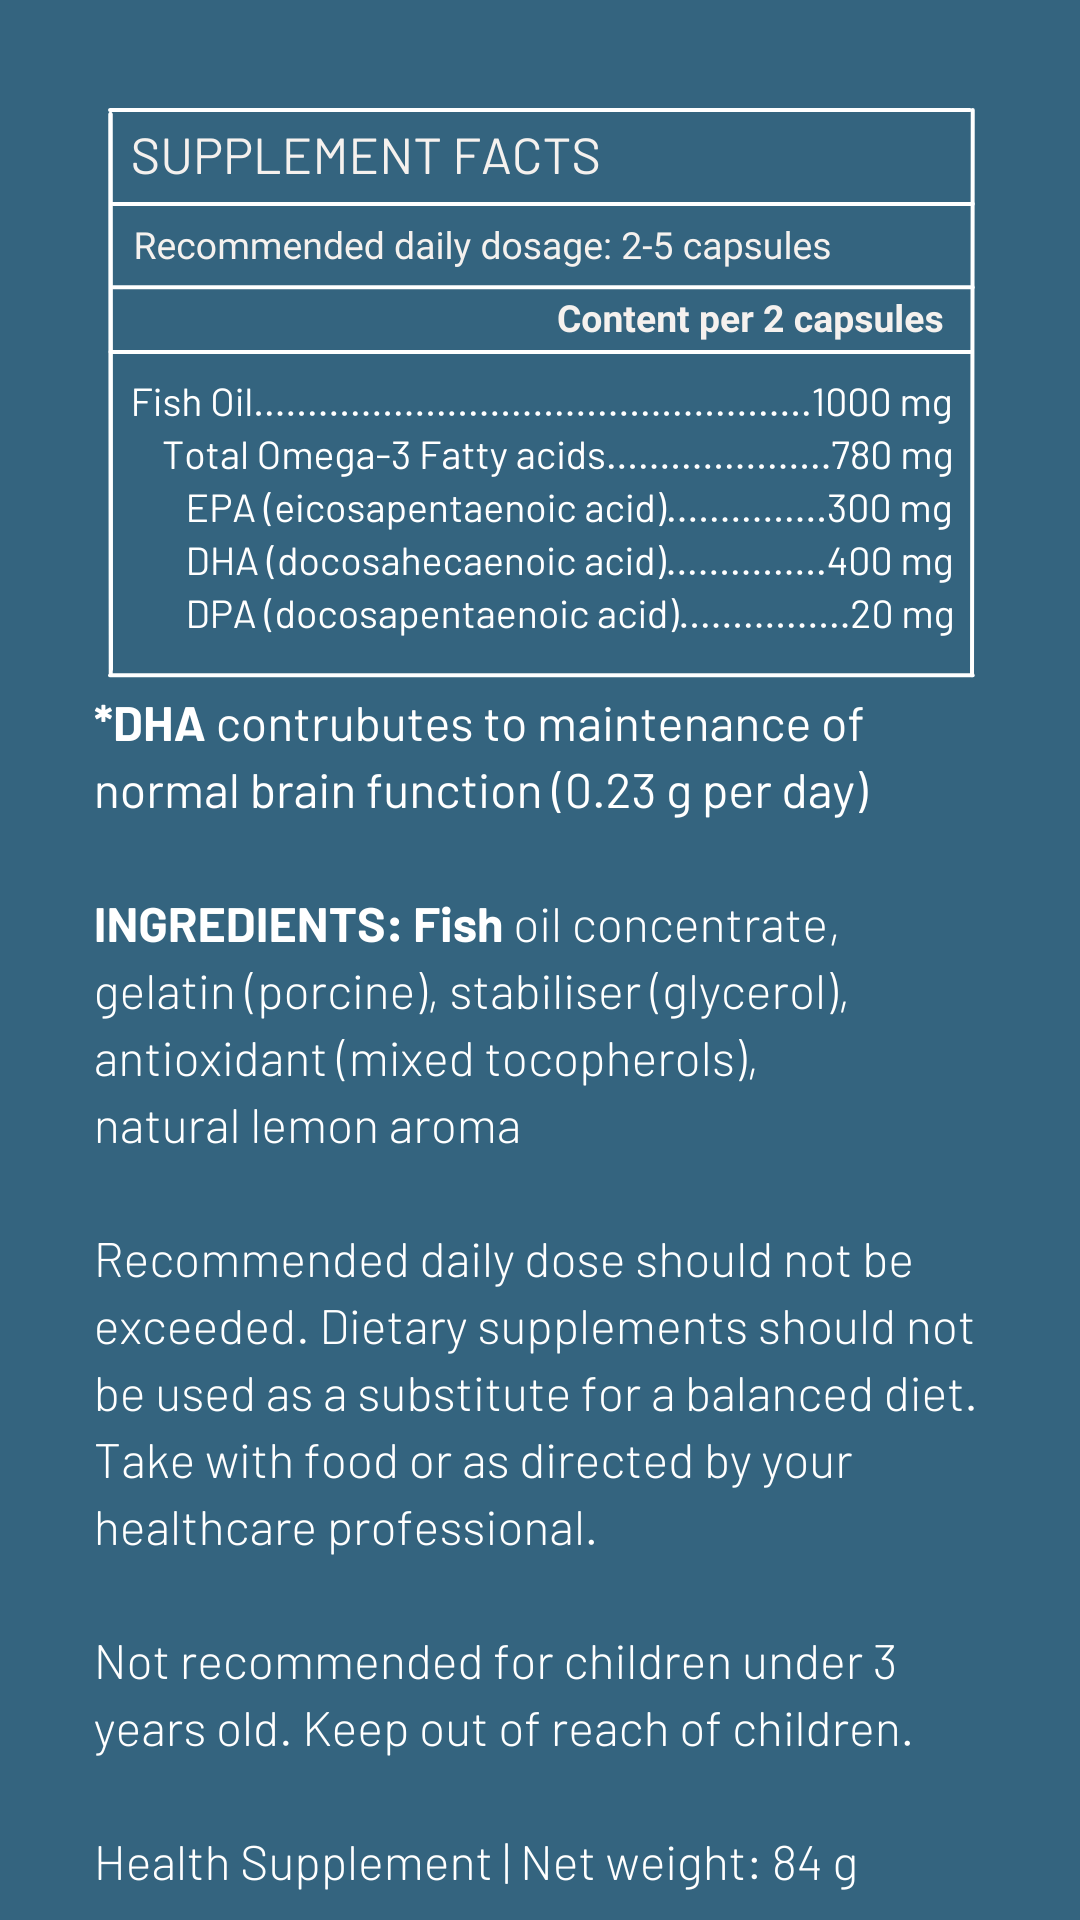 Fjorda Brain Supplement facts - 01.11.23.png